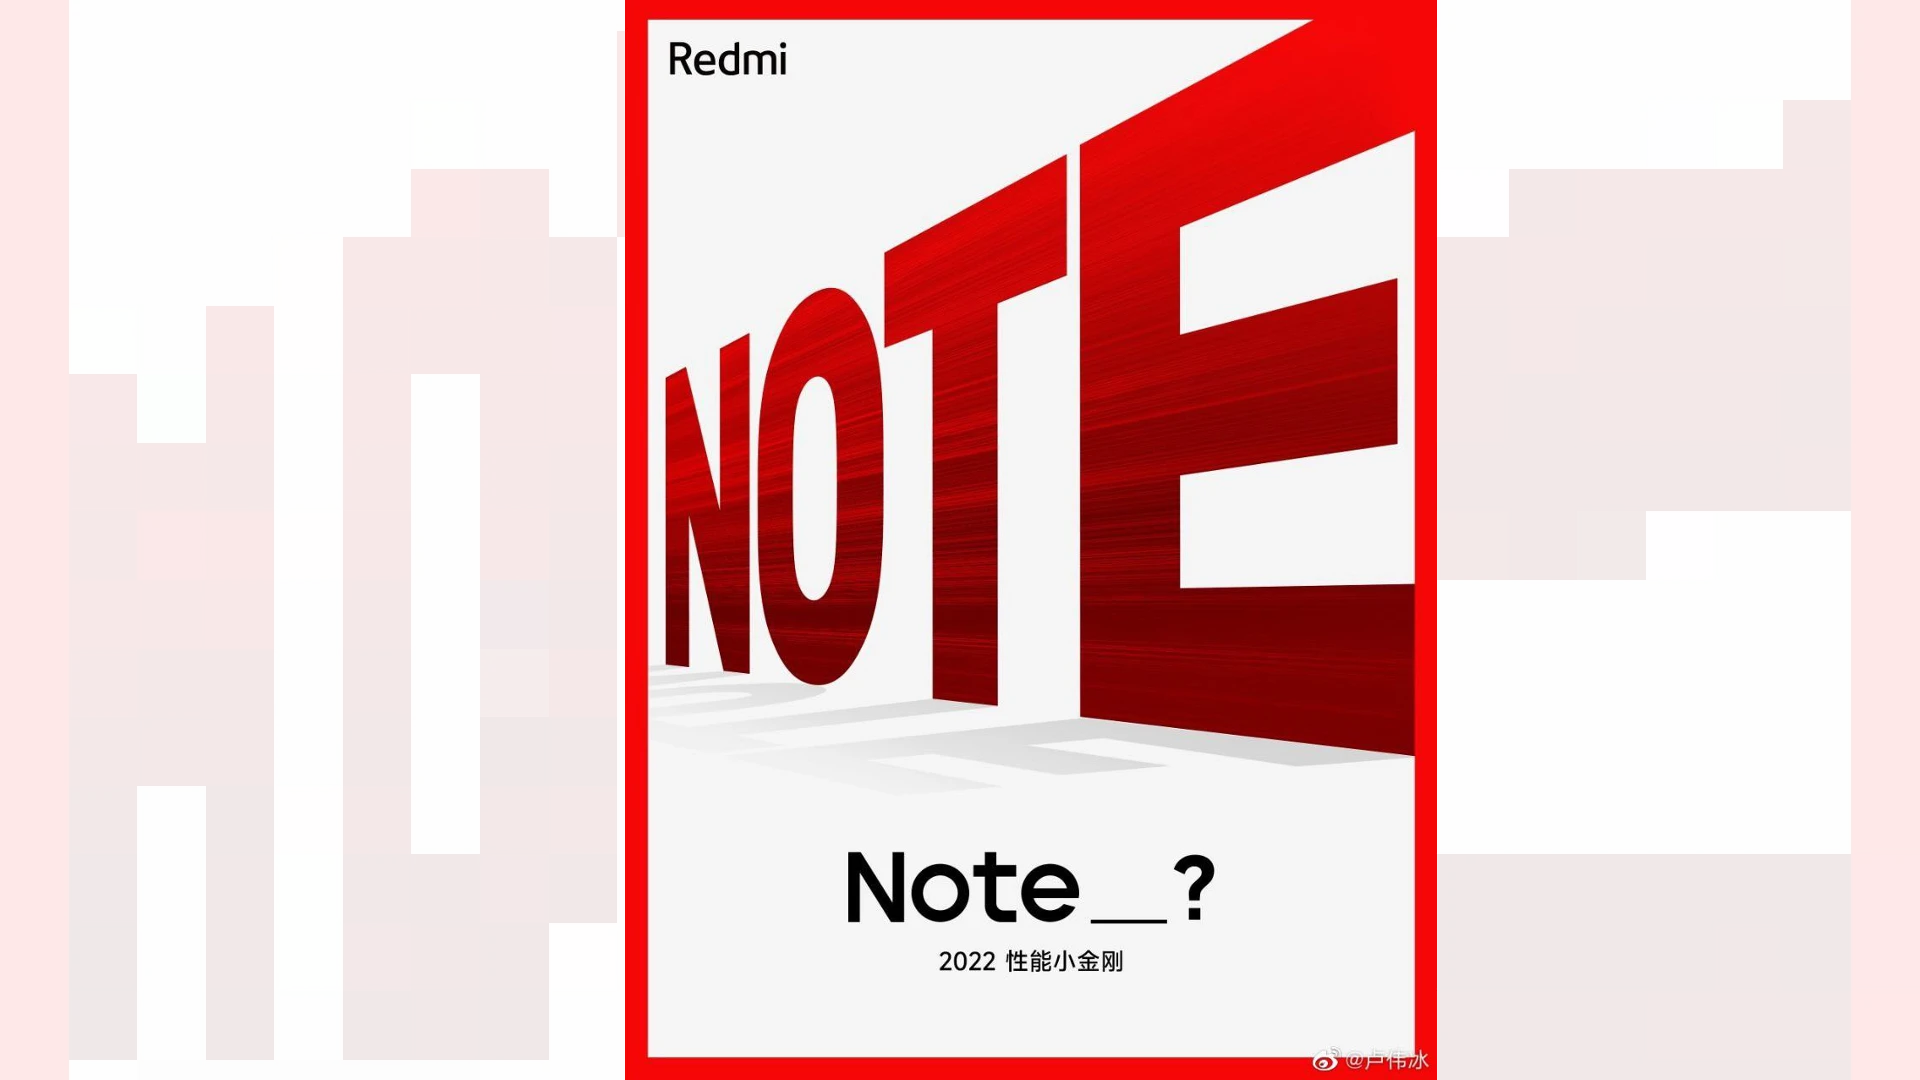 Redmi Note 12 Series Soon to Launch, Company Teases Upcoming Note Phones